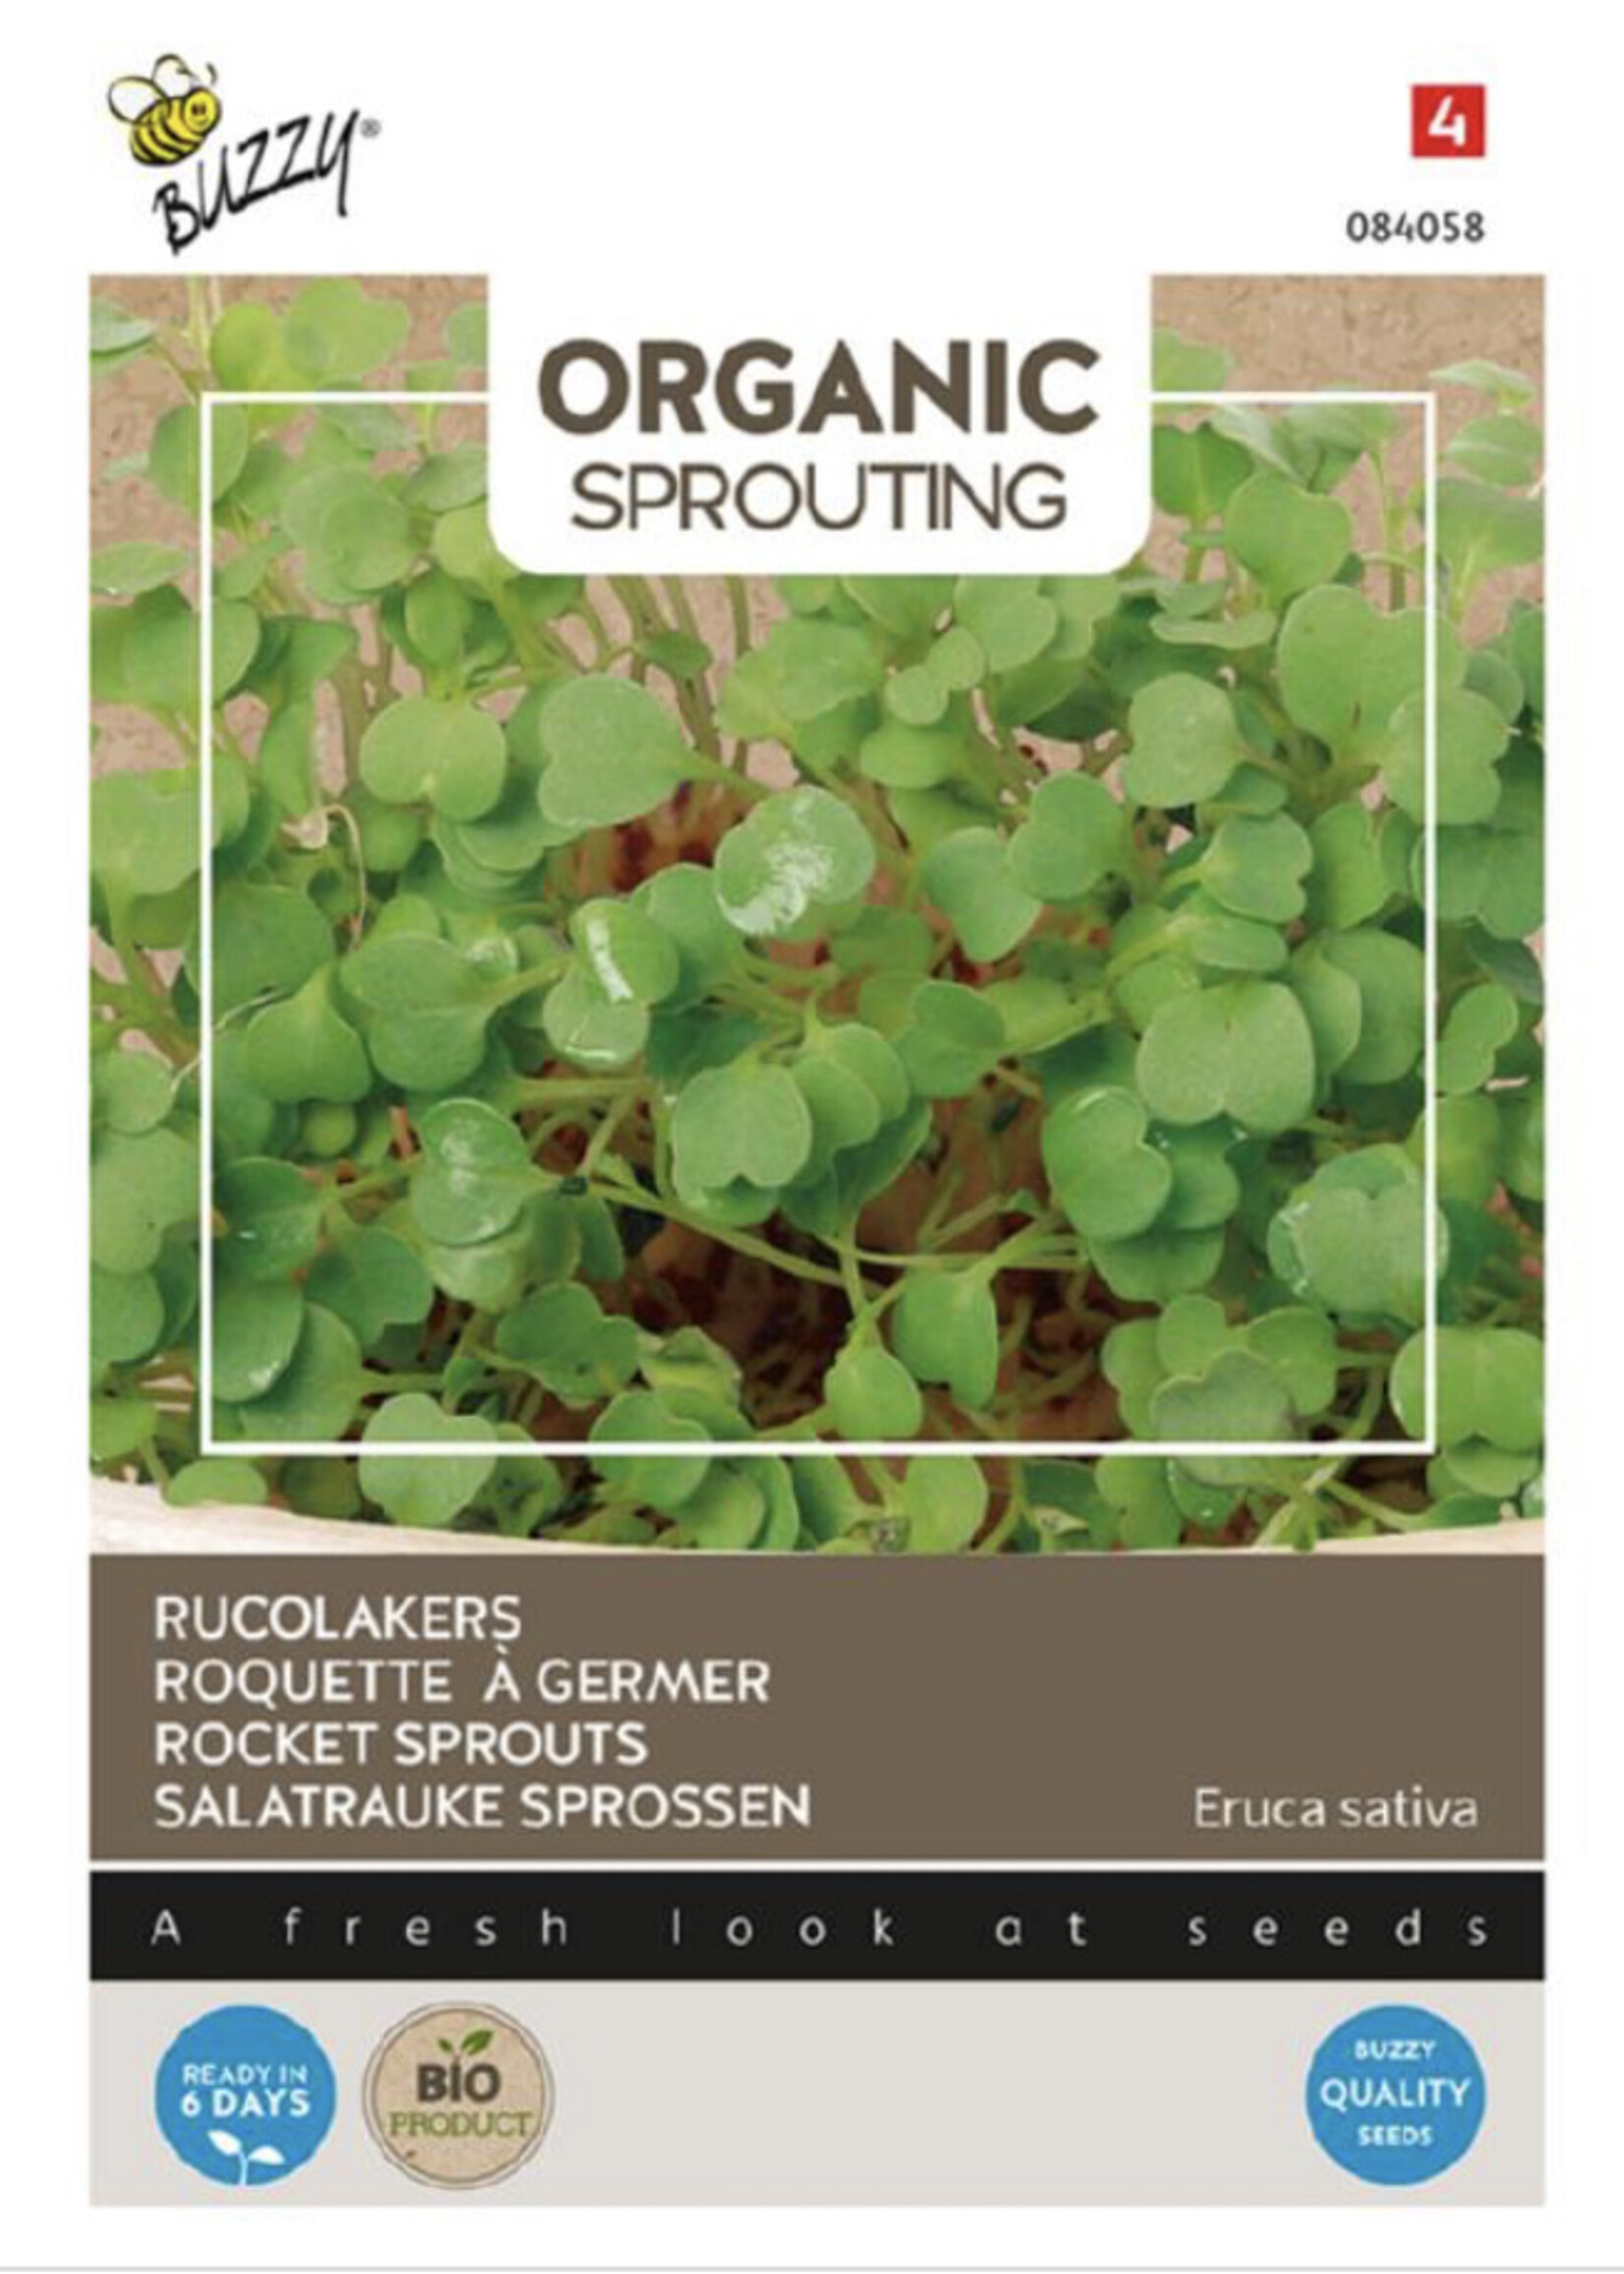 Buzzy Organic Sprouting Rucolakers